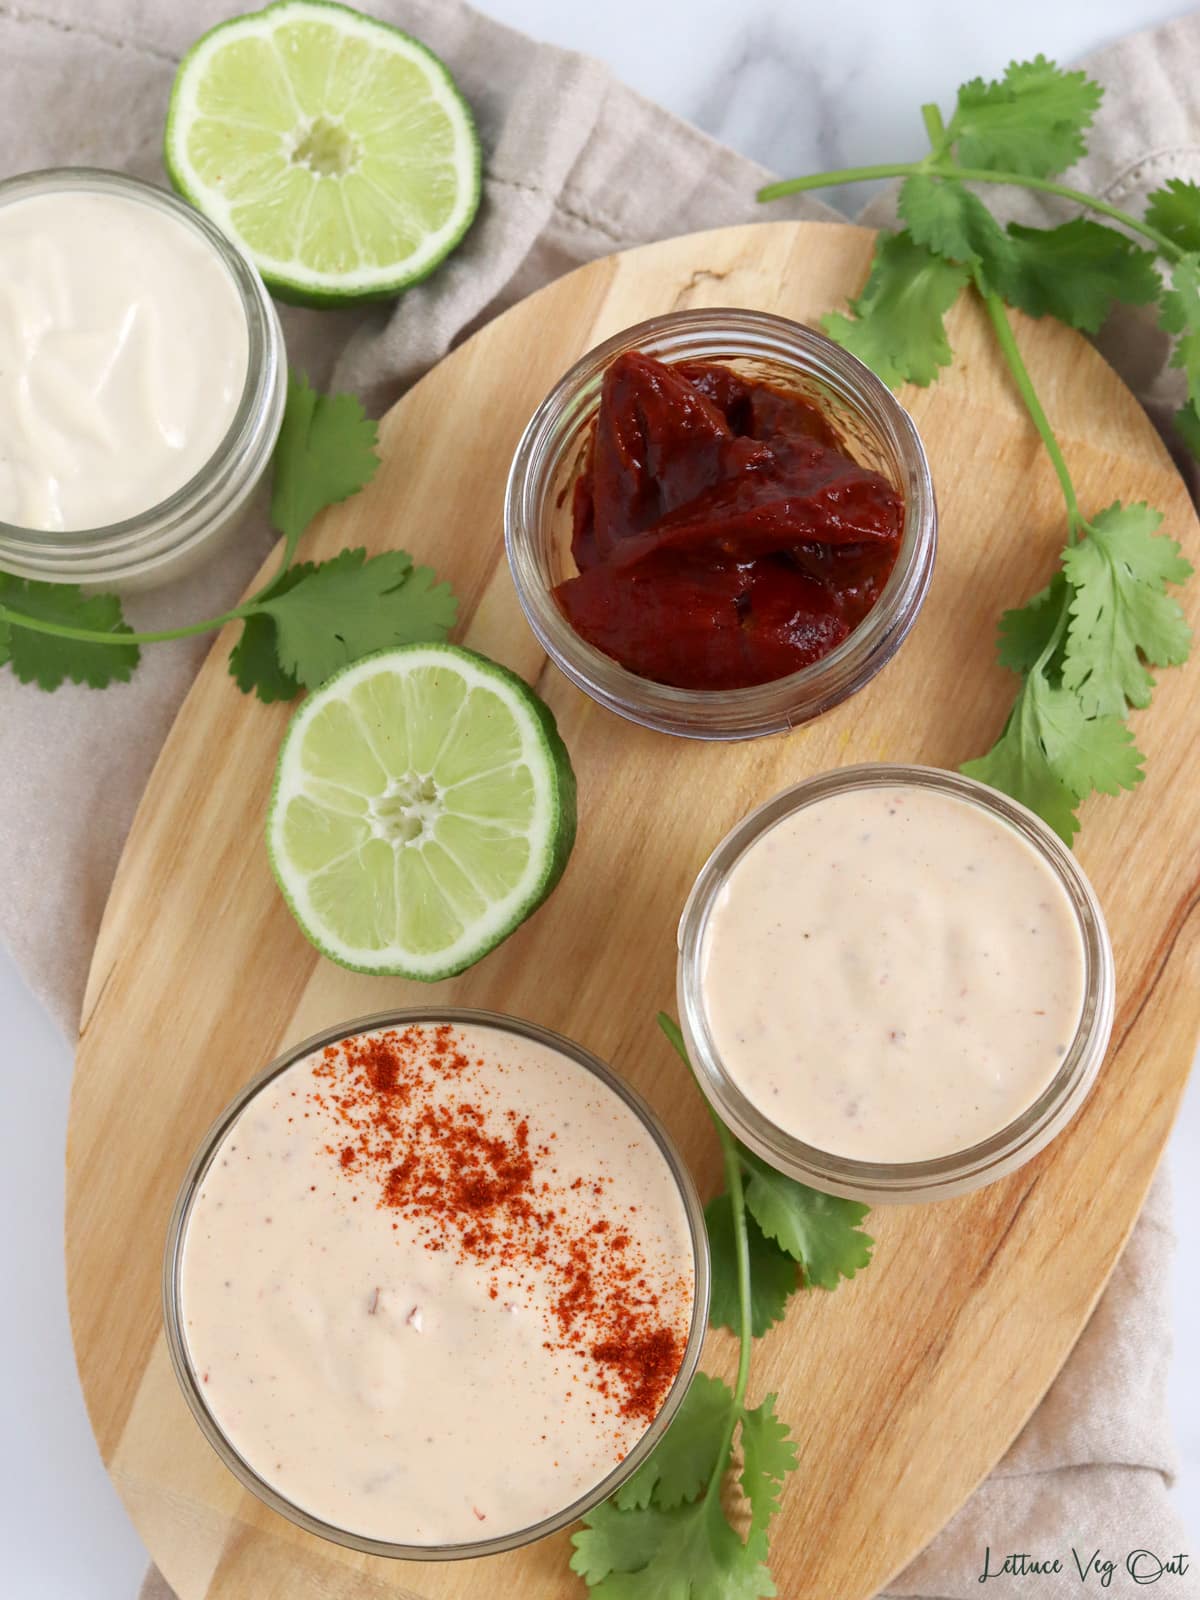 Two glass jars of chipotle mayo with third jar of chipotle peppers on wood board with lime and cilantro garnish.